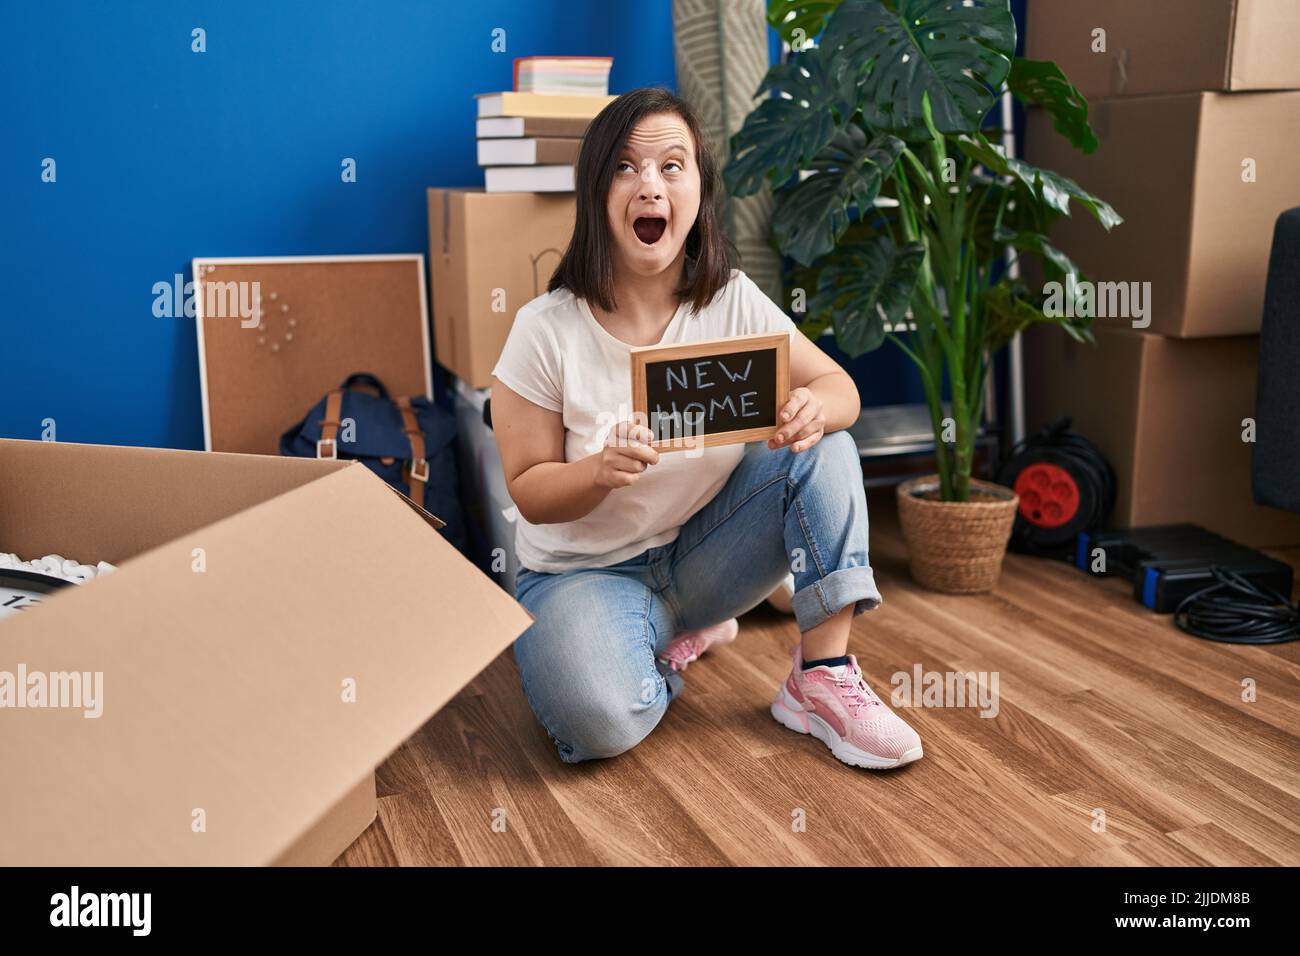 Hispanic girl with down syndrome sitting on the floor at new home angry and mad screaming frustrated and furious, shouting with anger looking up. Stock Photo